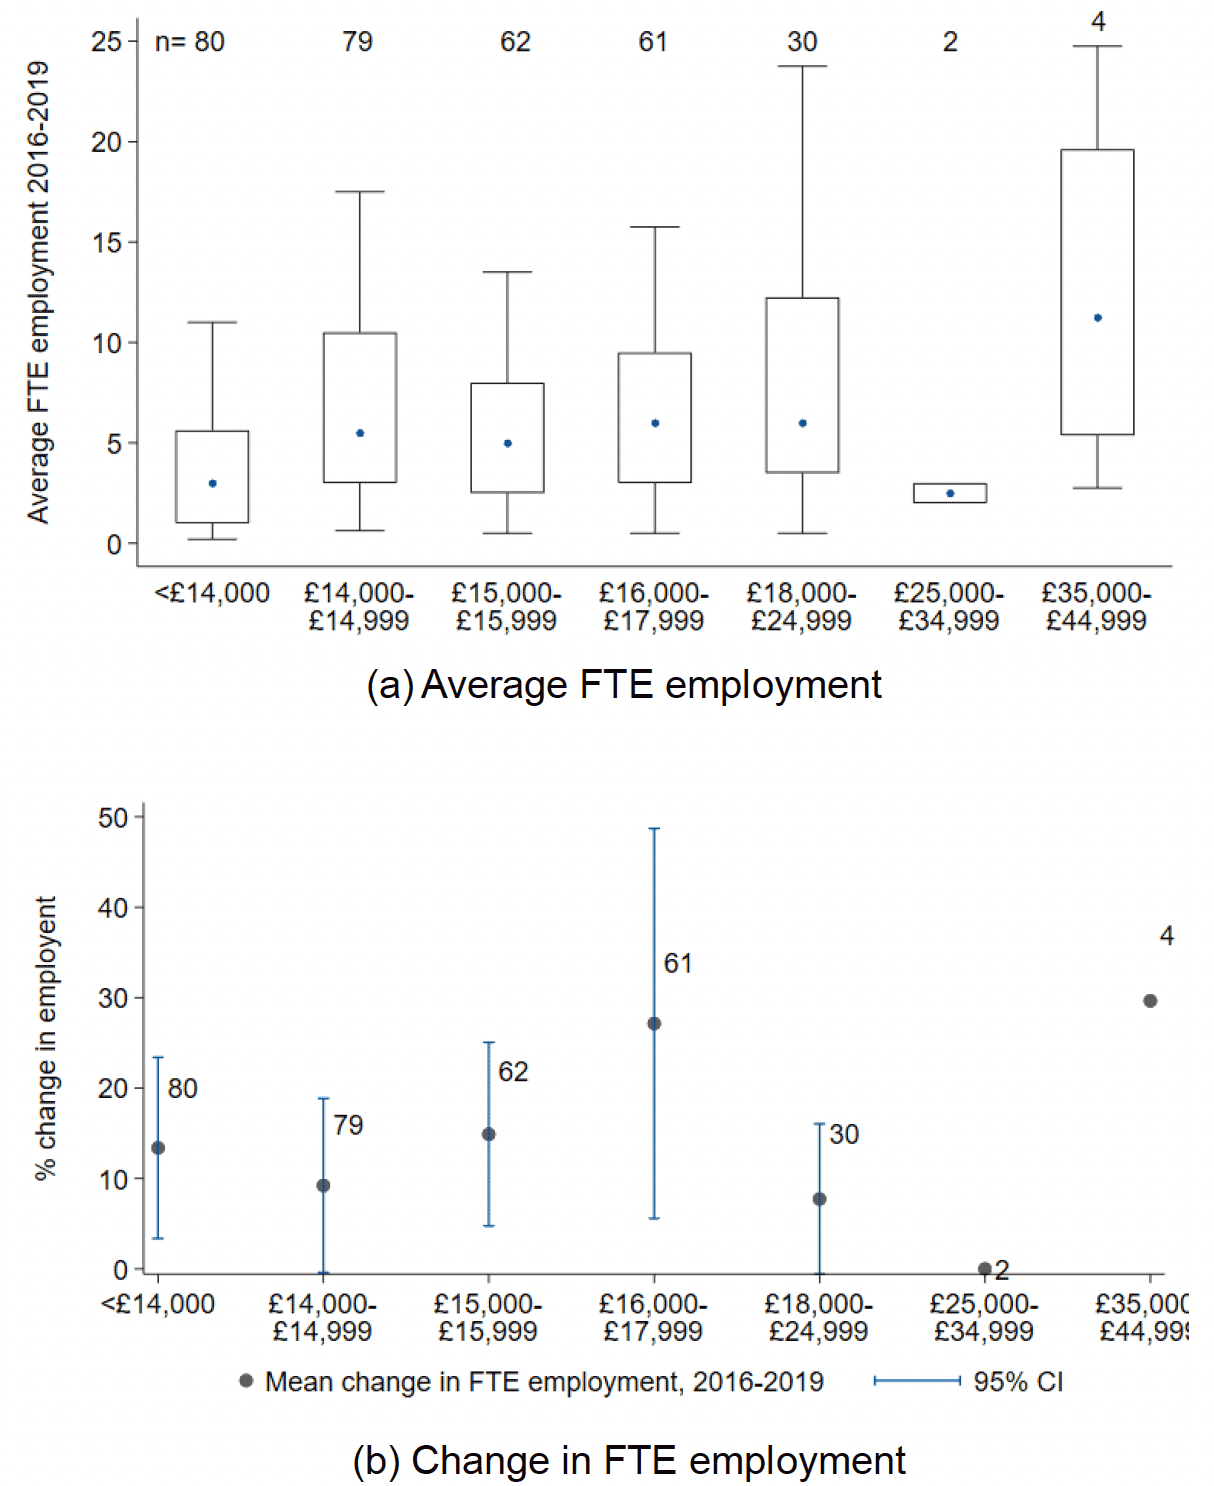 Two box and whisker plots show the mean and distribution of employment and percentage change in employment for each rateable value band according to the valuation roll.